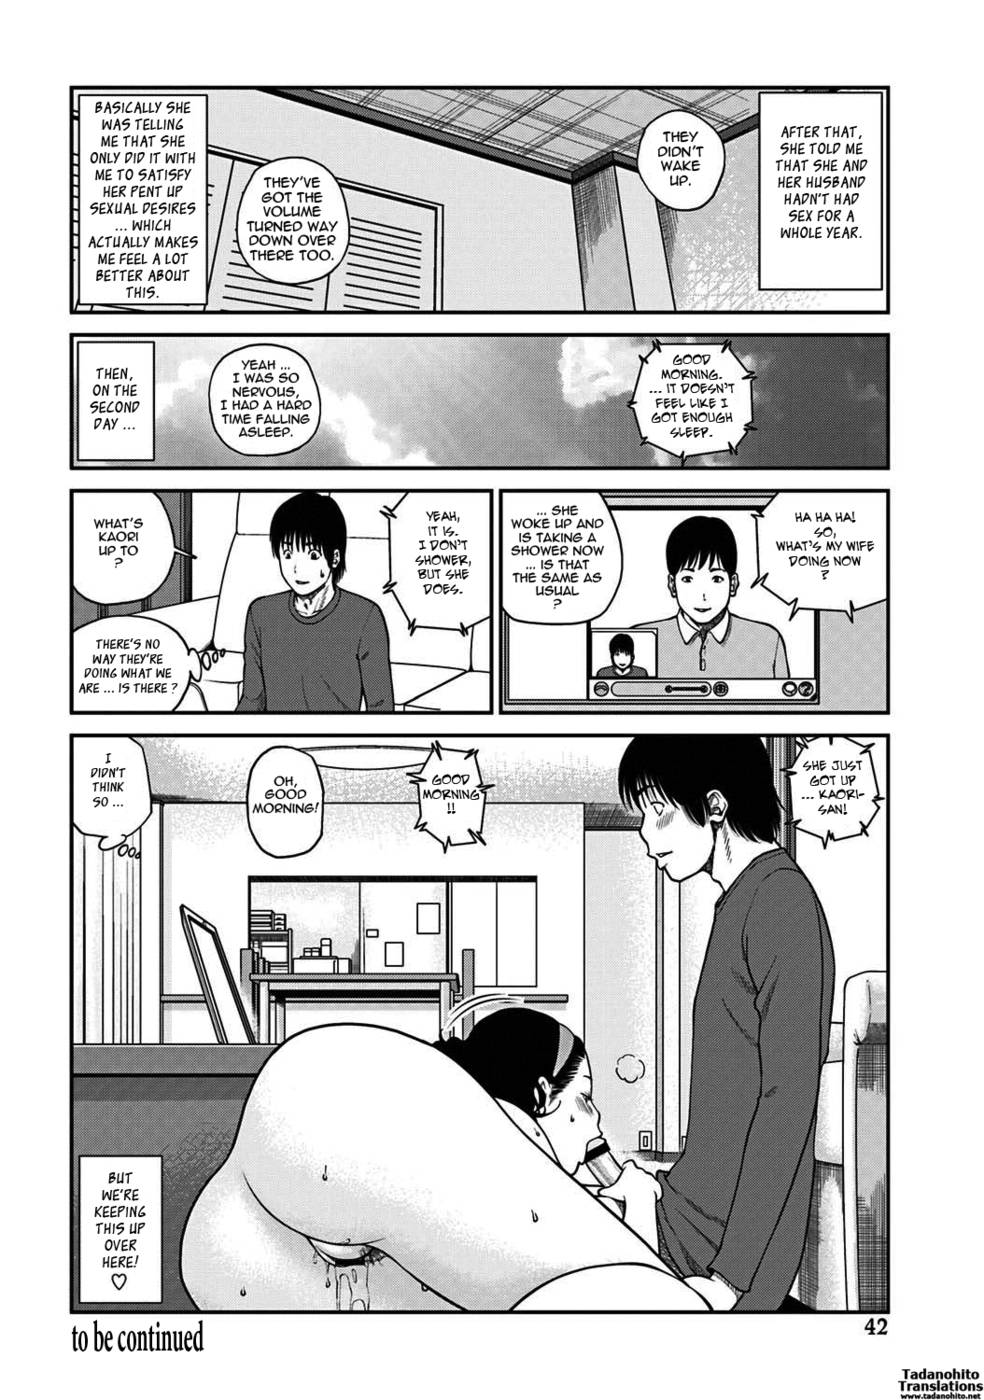 33 Year Old Unsatisfied Wife-Chapter 2-Spouse Swapping-First Night-Hentai Manga Hentai Comic image picture